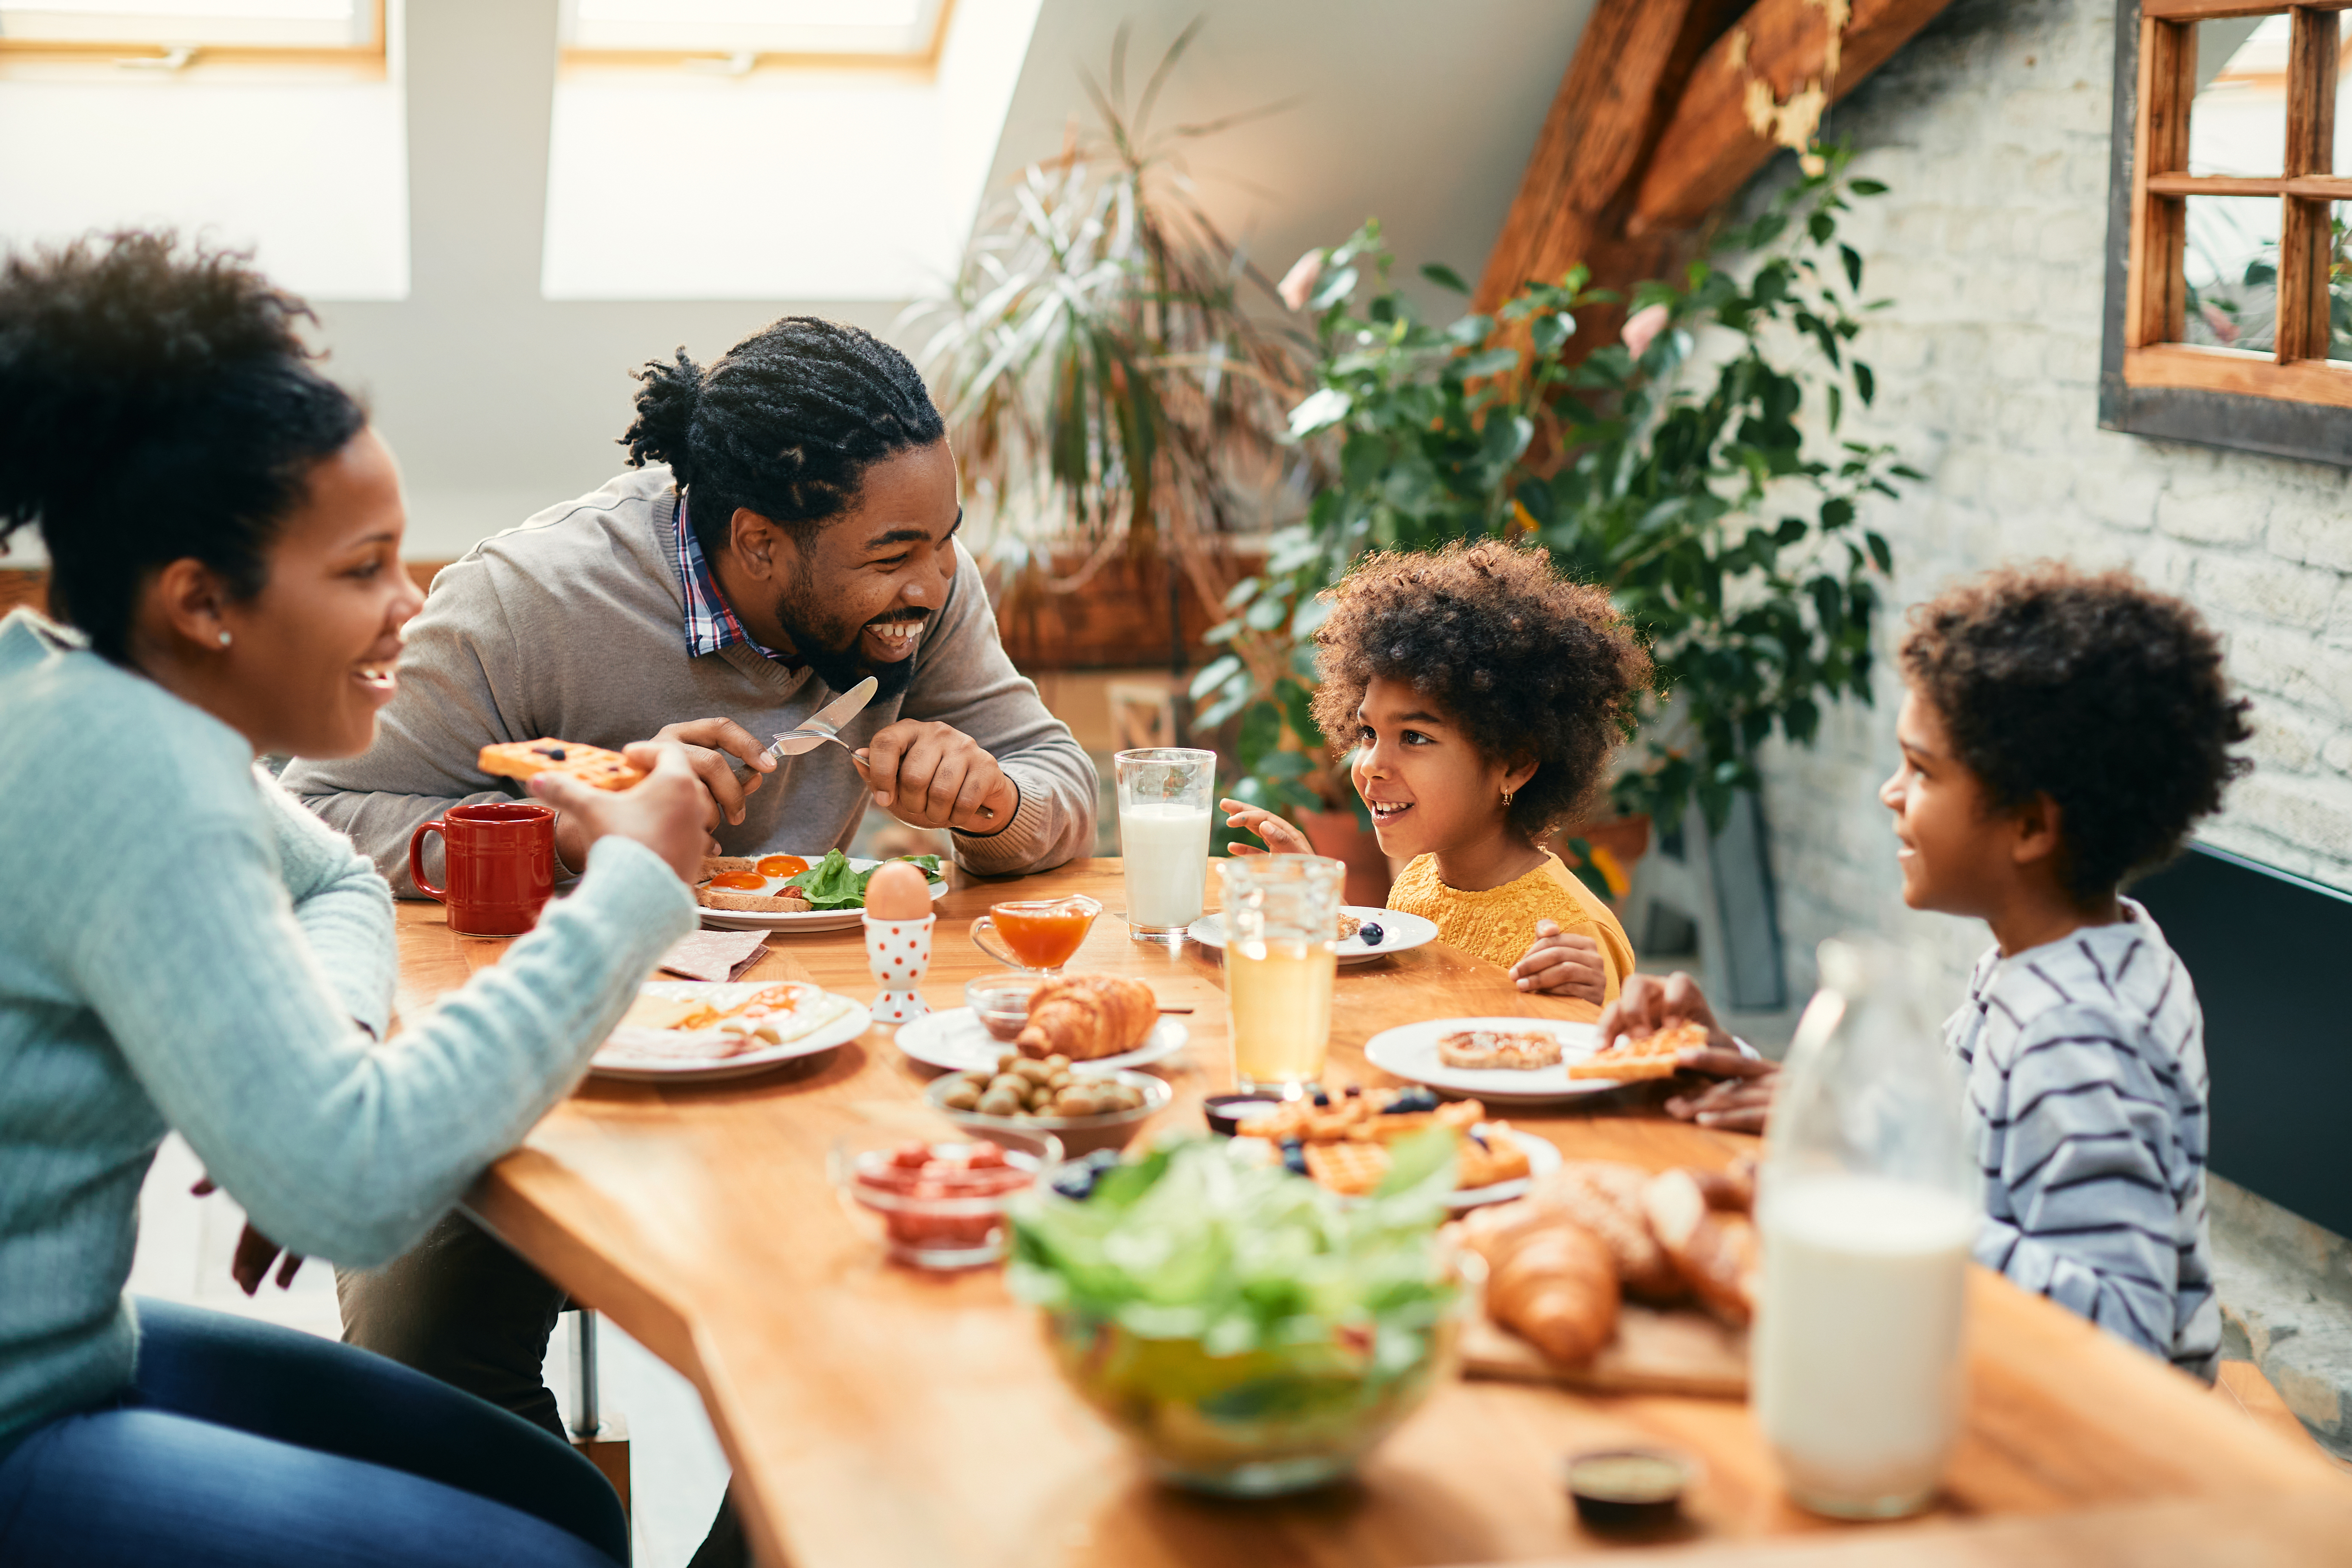 5 Benefits of Eating Together as a Family